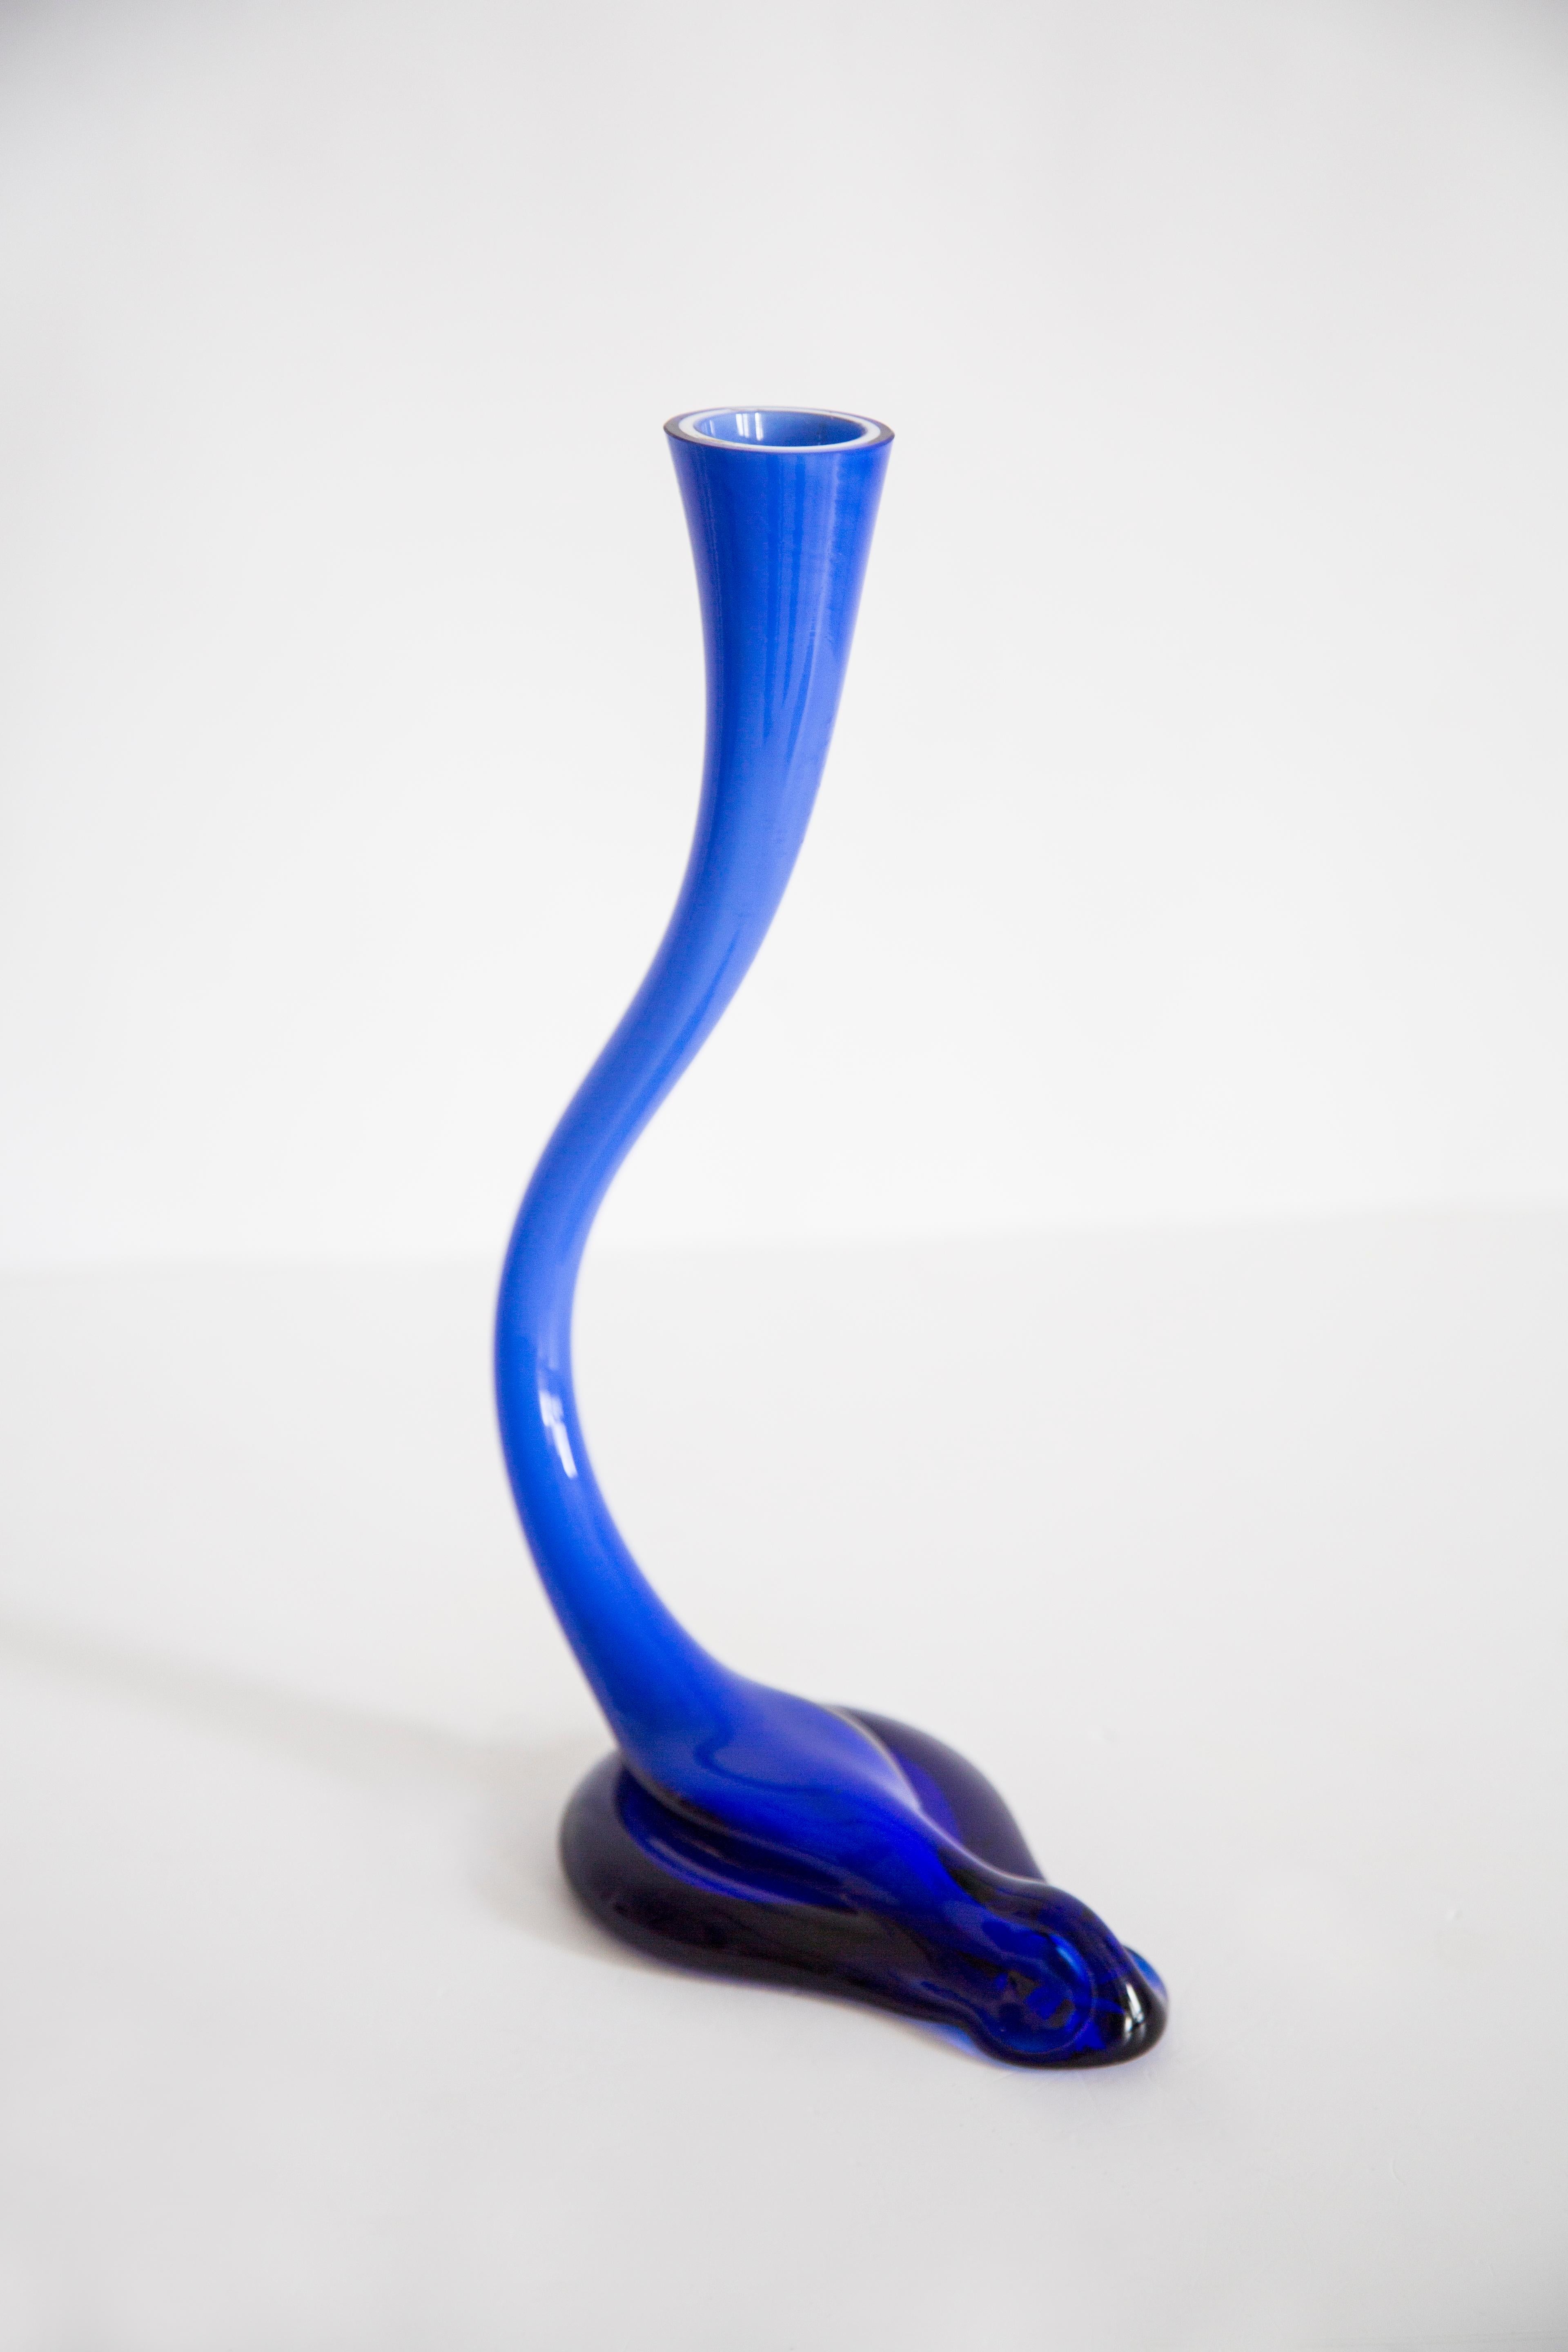 Mid Century Blue Artistic Twisted Vase, Europe, 1960s For Sale 3